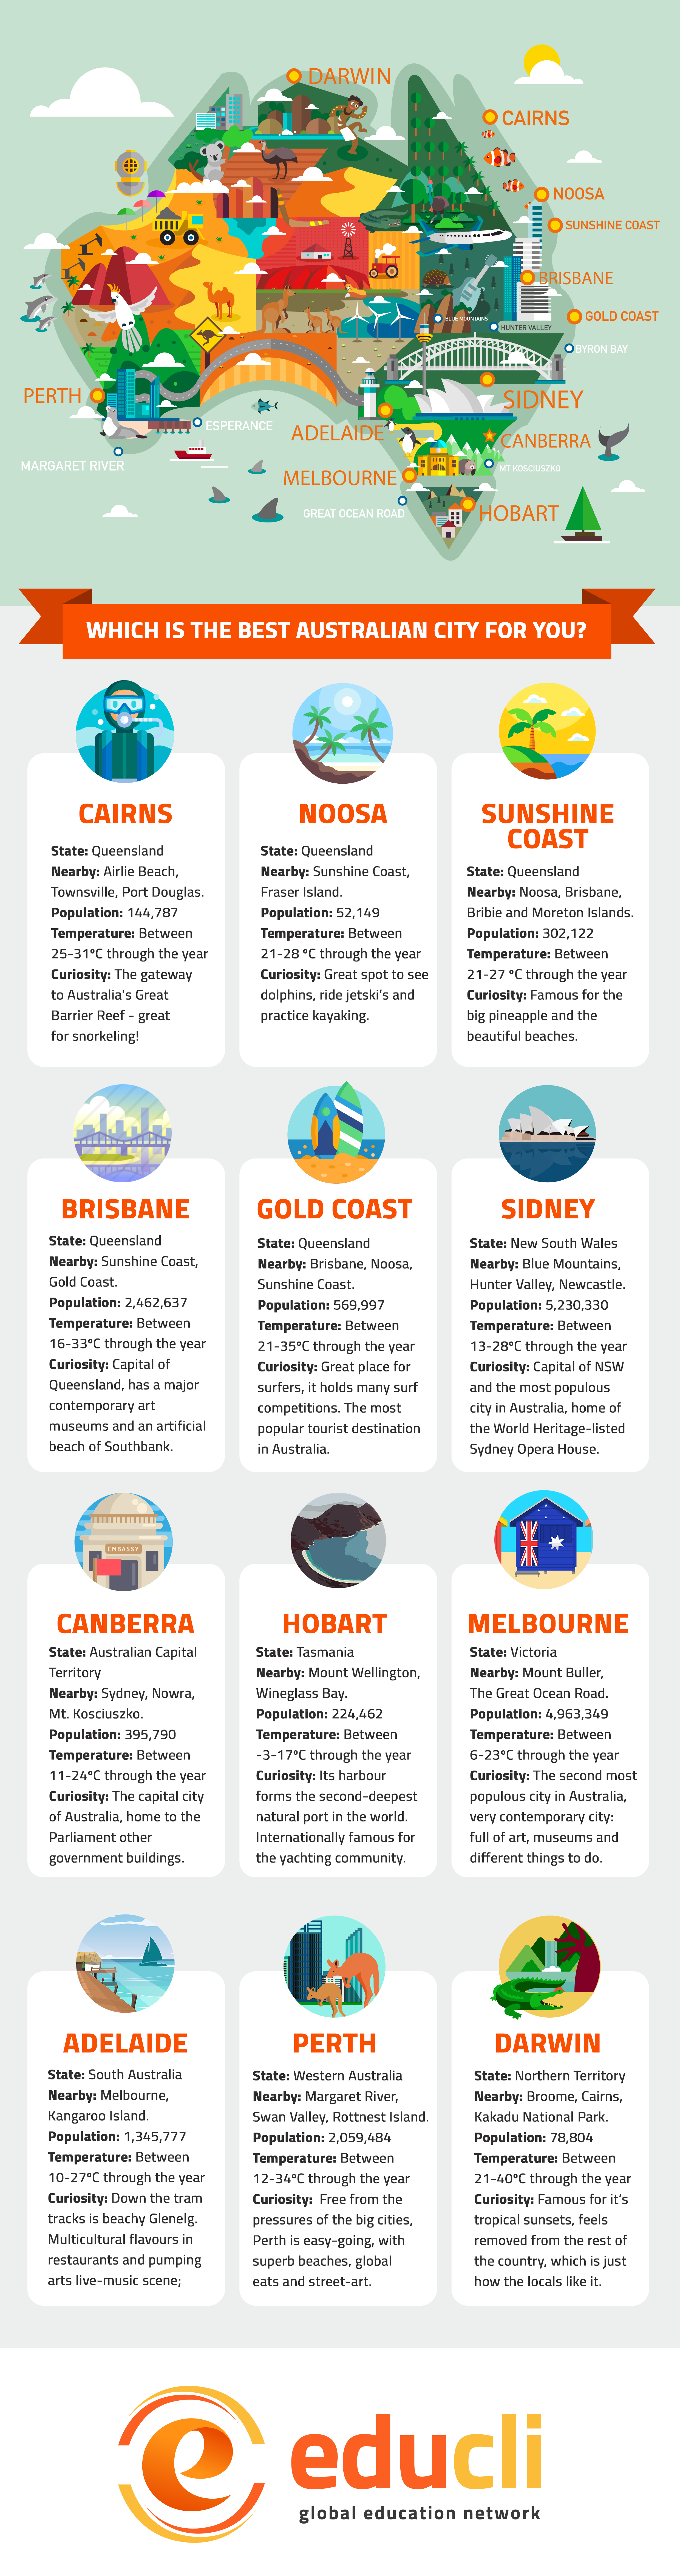 WHICH IS THE BEST AUSTRALIAN CITY FOR YOU?